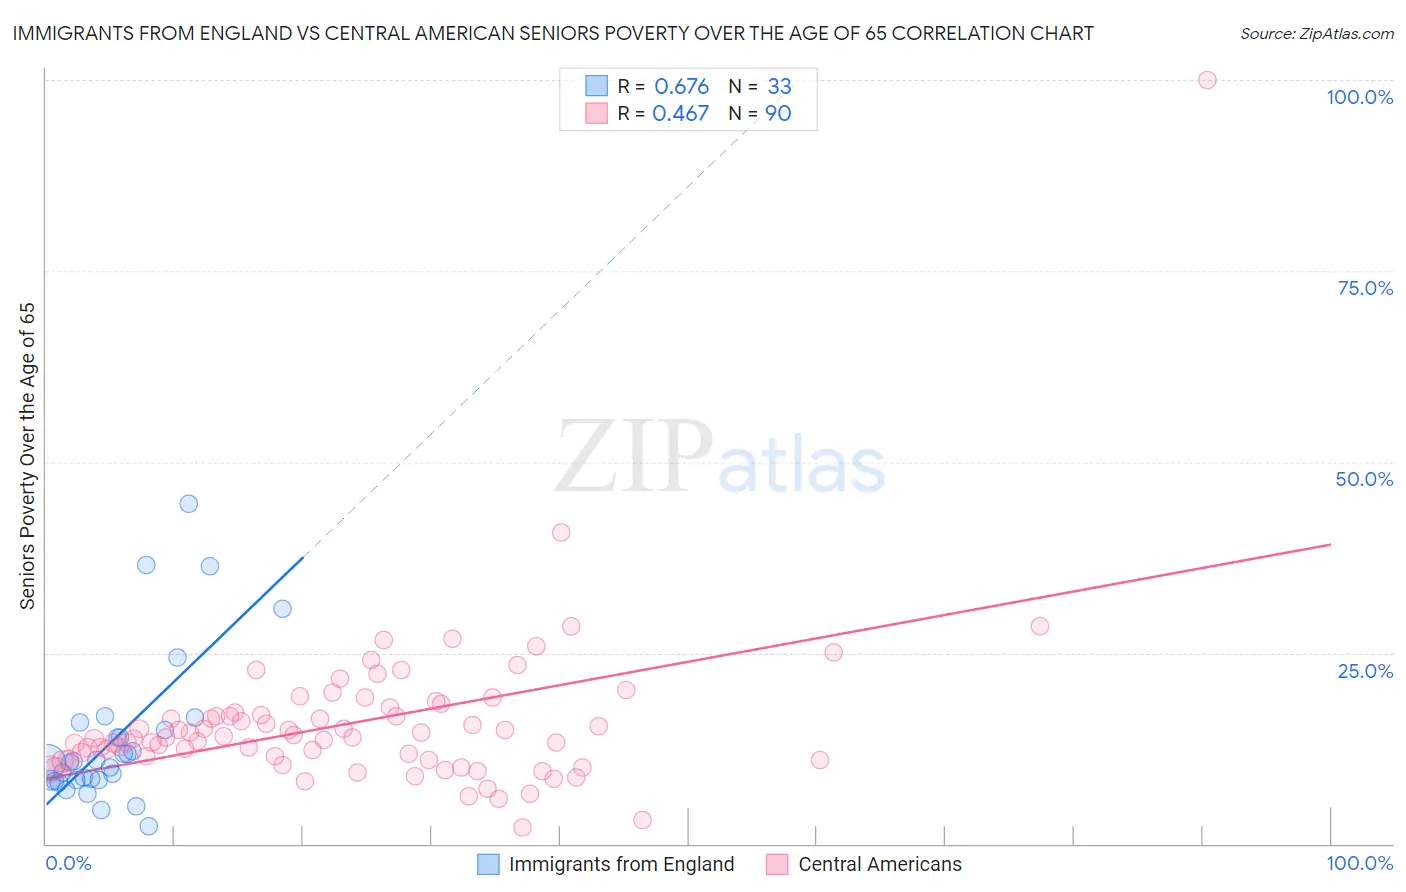 Immigrants from England vs Central American Seniors Poverty Over the Age of 65